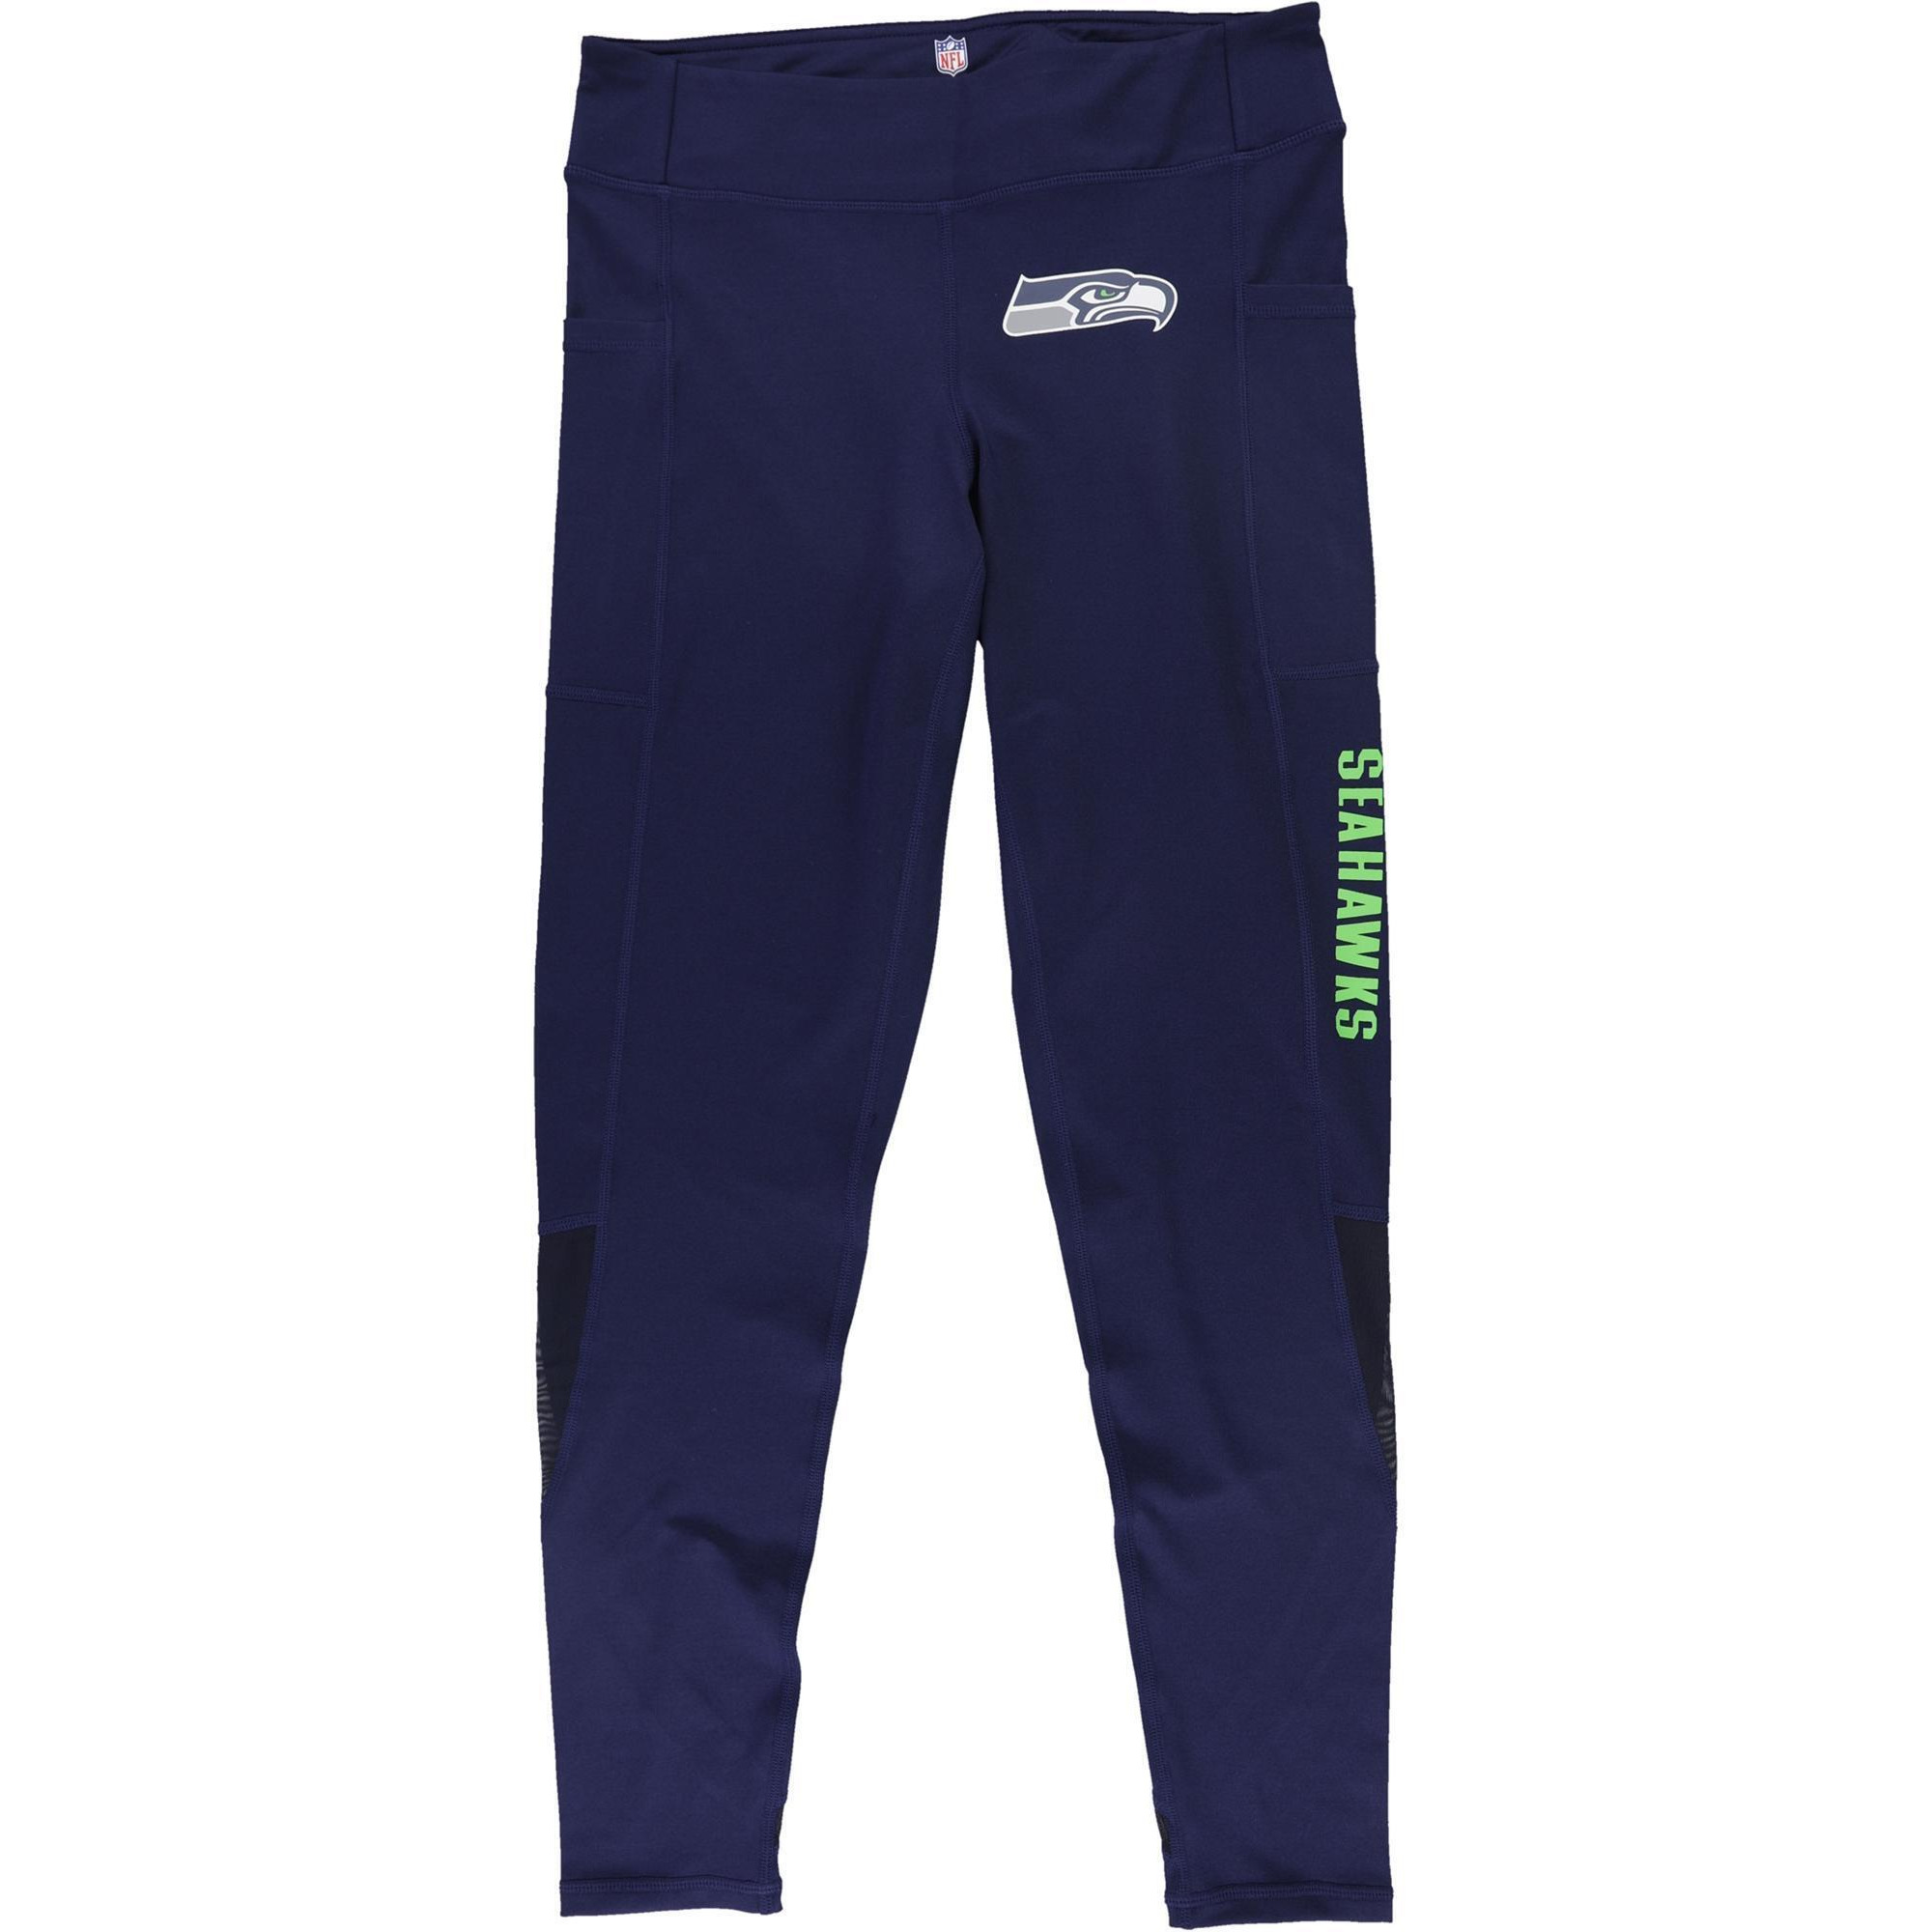 MSX Womens Seattle Seahawks Compression Athletic Pants, Style # 6Q20N882